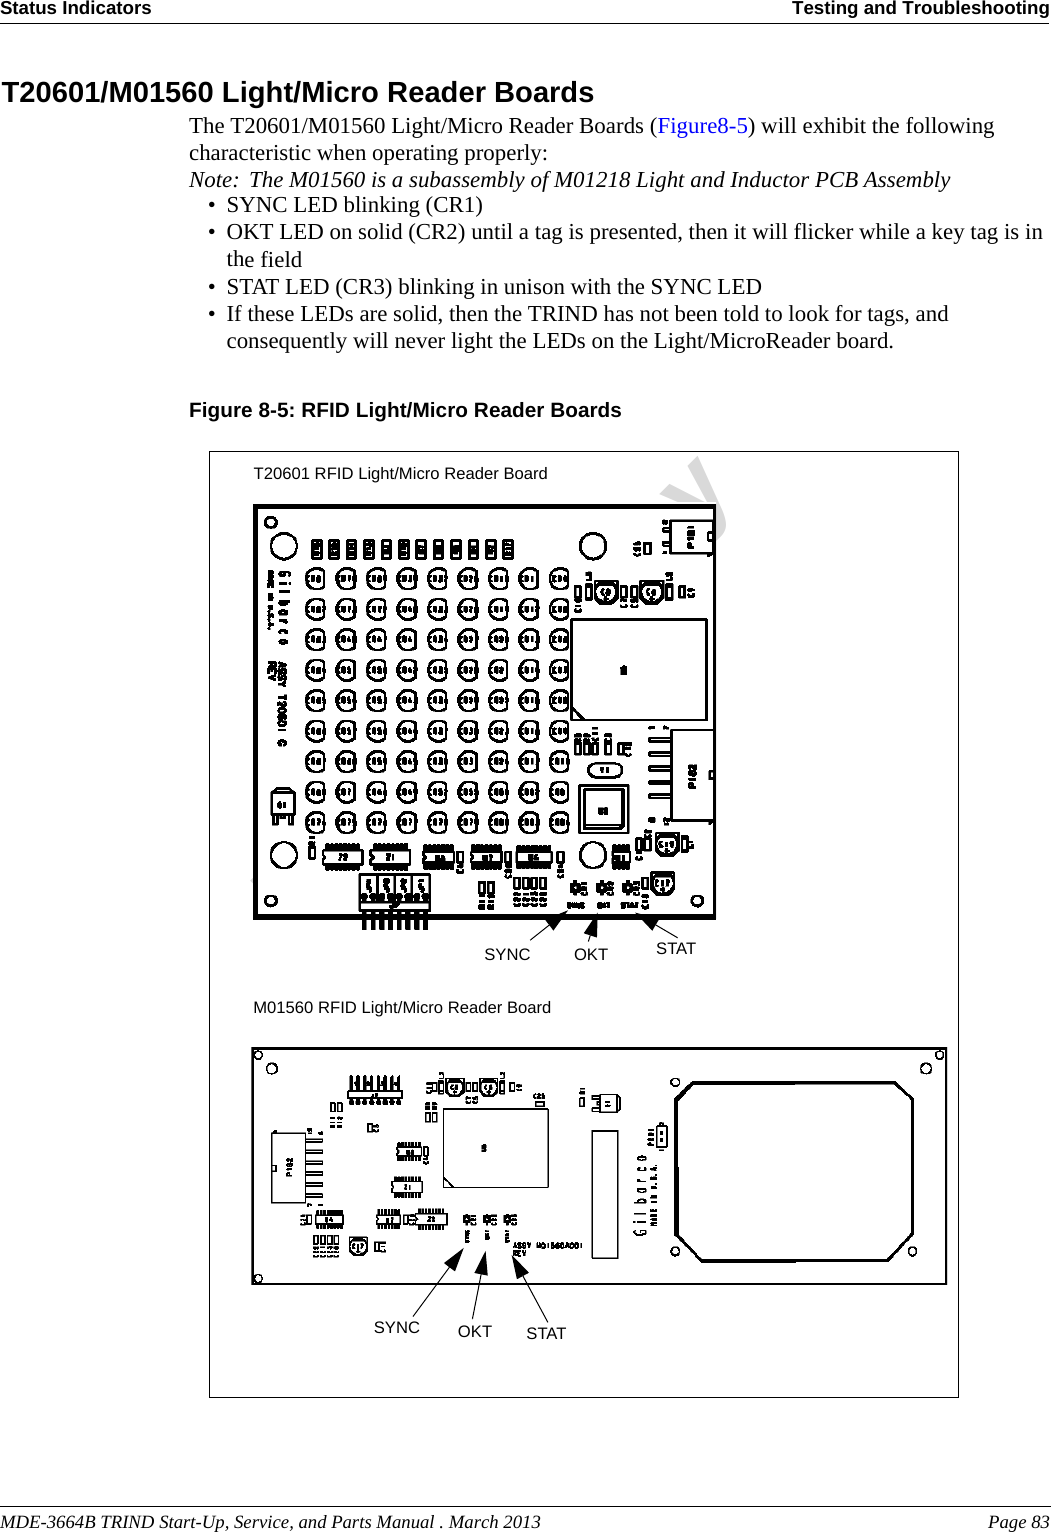 MDE-3664B TRIND Start-Up, Service, and Parts Manual . March 2013 Page 83Status Indicators Testing and TroubleshootingPreliminaryT20601/M01560 Light/Micro Reader BoardsThe T20601/M01560 Light/Micro Reader Boards (Figure8-5) will exhibit the following characteristic when operating properly:Note: The M01560 is a subassembly of M01218 Light and Inductor PCB Assembly•SYNC LED blinking (CR1)• OKT LED on solid (CR2) until a tag is presented, then it will flicker while a key tag is in the field• STAT LED (CR3) blinking in unison with the SYNC LED• If these LEDs are solid, then the TRIND has not been told to look for tags, and consequently will never light the LEDs on the Light/MicroReader board. Figure 8-5: RFID Light/Micro Reader Boards SYNC OKT STATM01560 RFID Light/Micro Reader BoardSYNC OKT STATT20601 RFID Light/Micro Reader Board